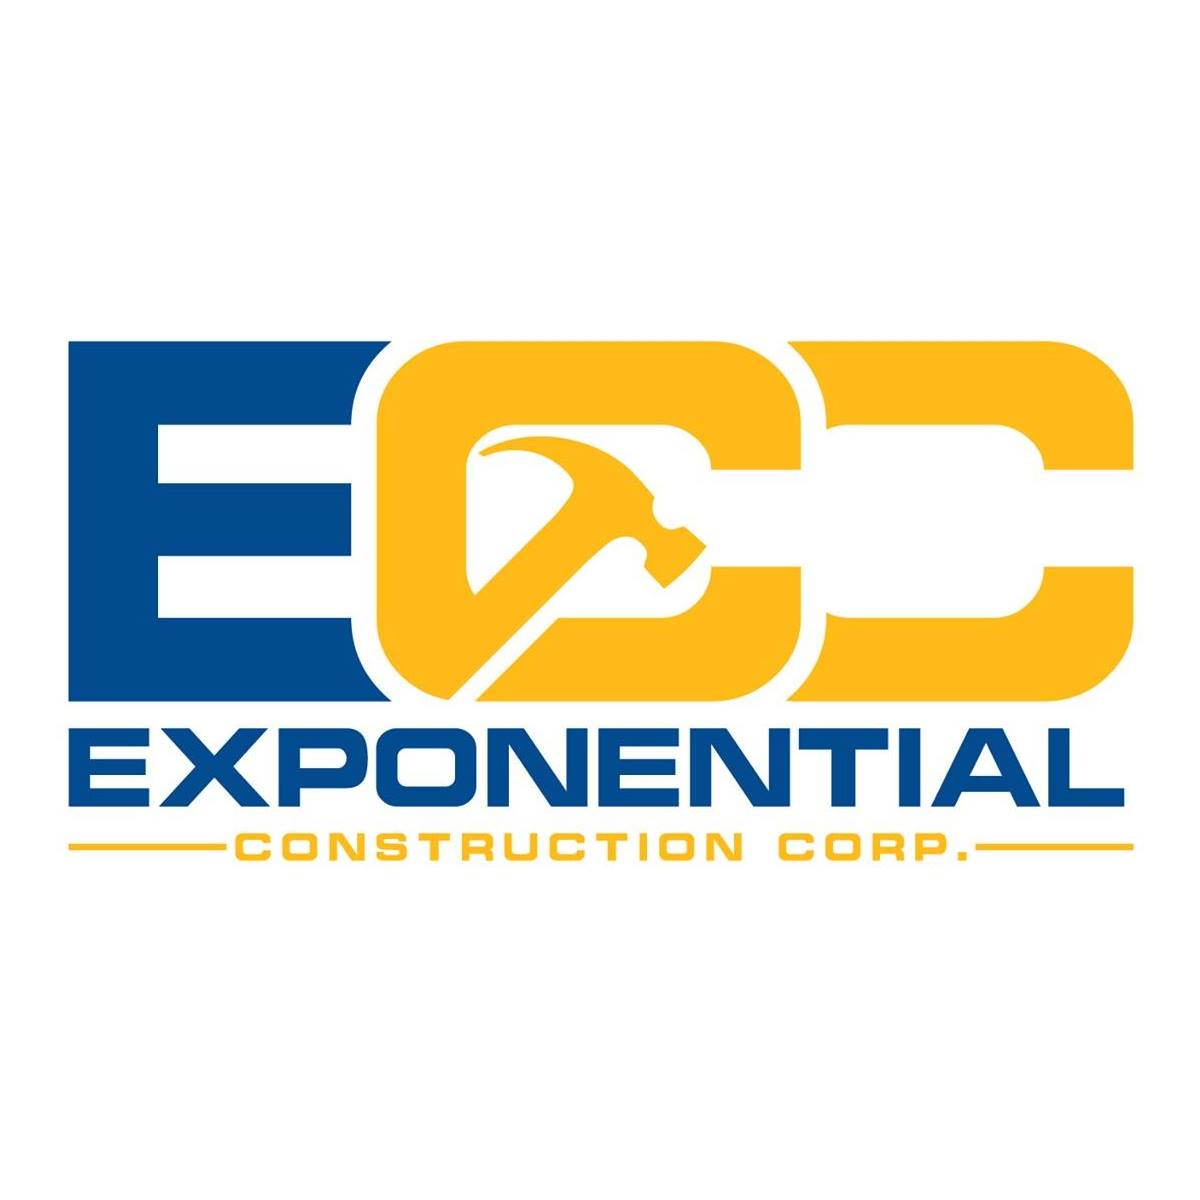 Exponential Construction Corp. - Framingham Remodeler Explains Why Hiring an Experienced Contractor for Home Renovation is an Excellent Idea